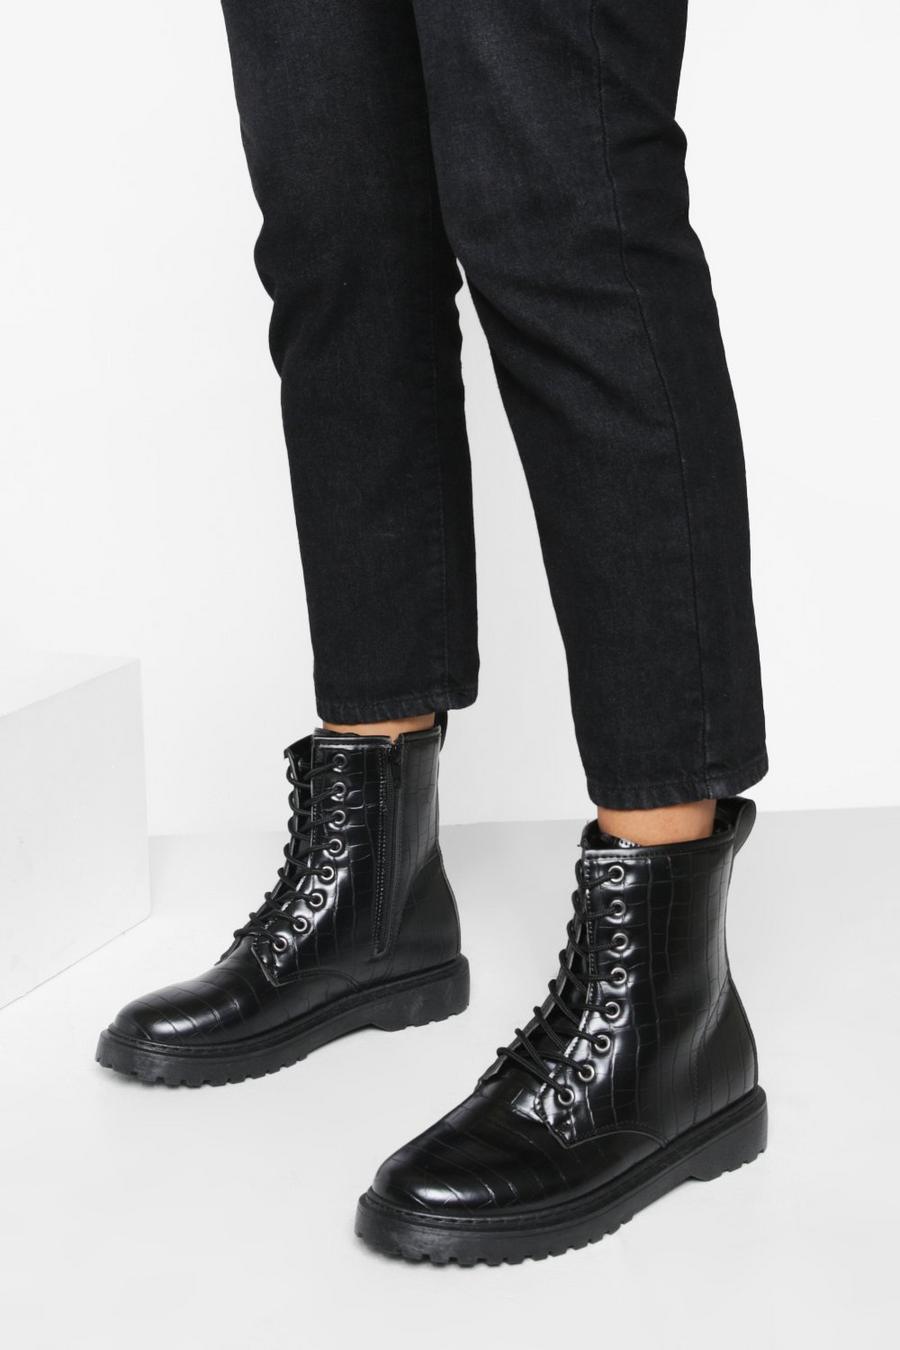 Black Croc Lace Up Chunky Hiker Boots